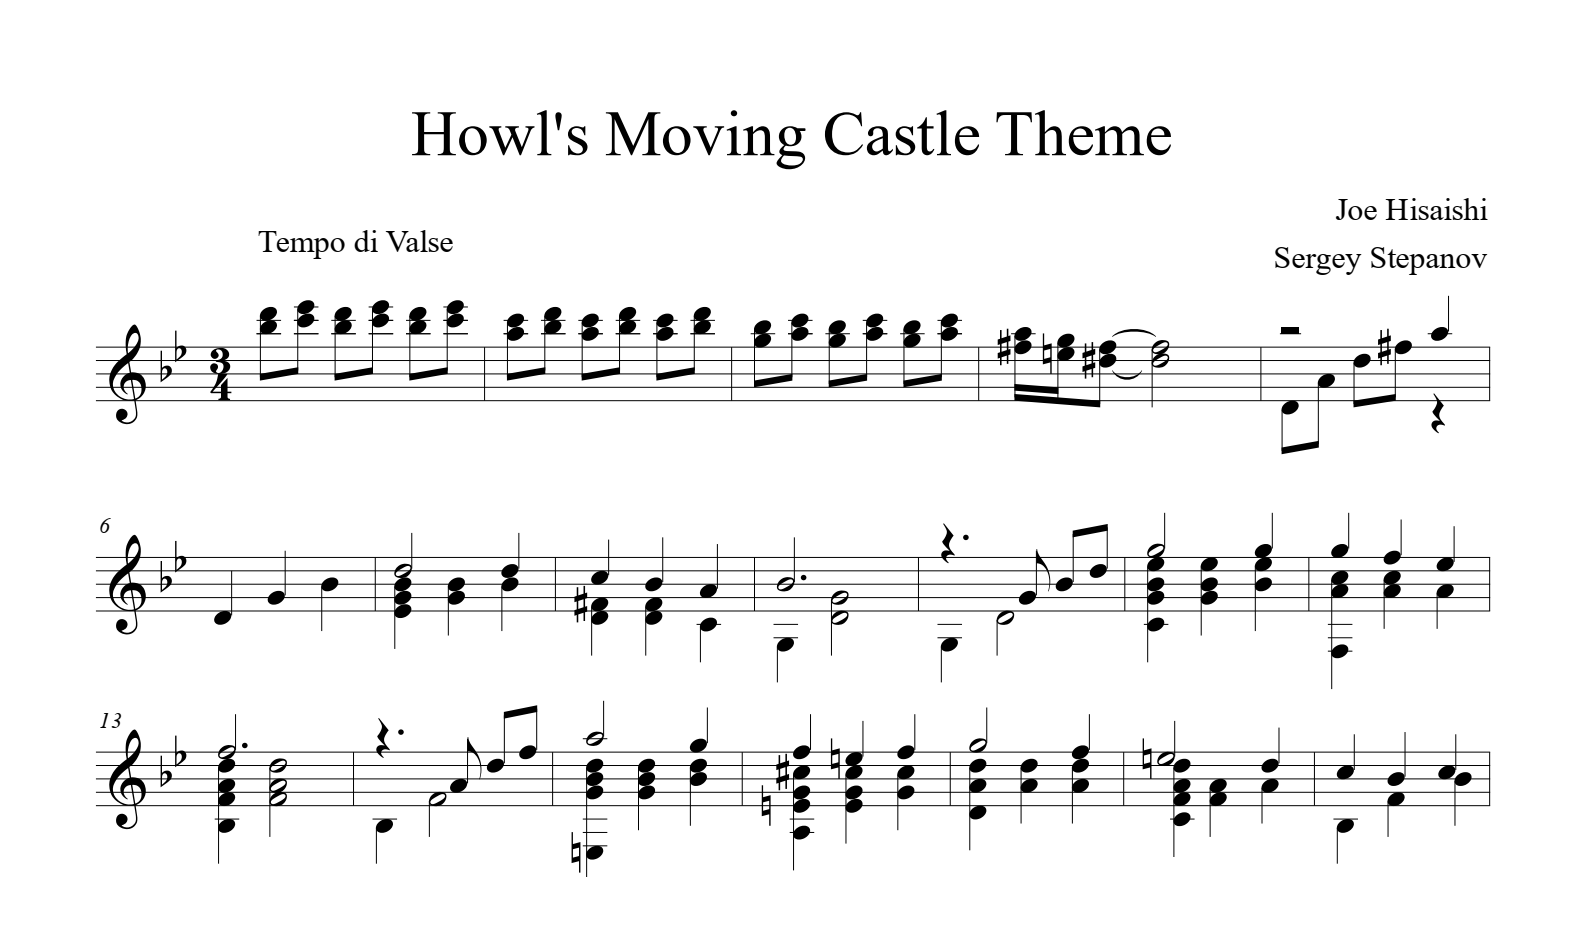 Howls Moving Castle Theme For Guitar Sheet Music And Tabs.